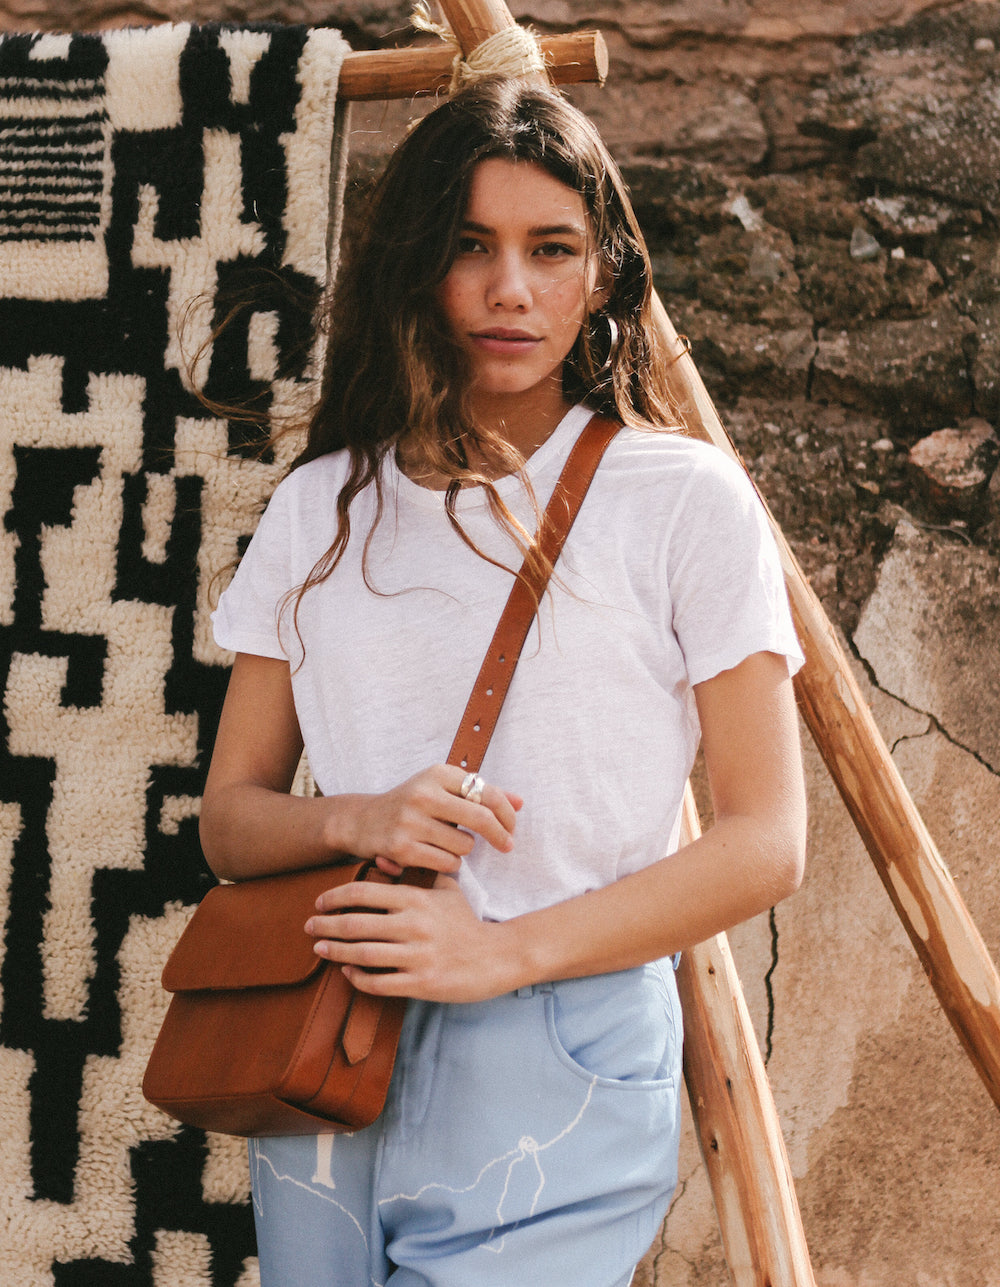 Cognac Leather womens handbag. Square shape with an adjustable strap. Lifestyle product image.